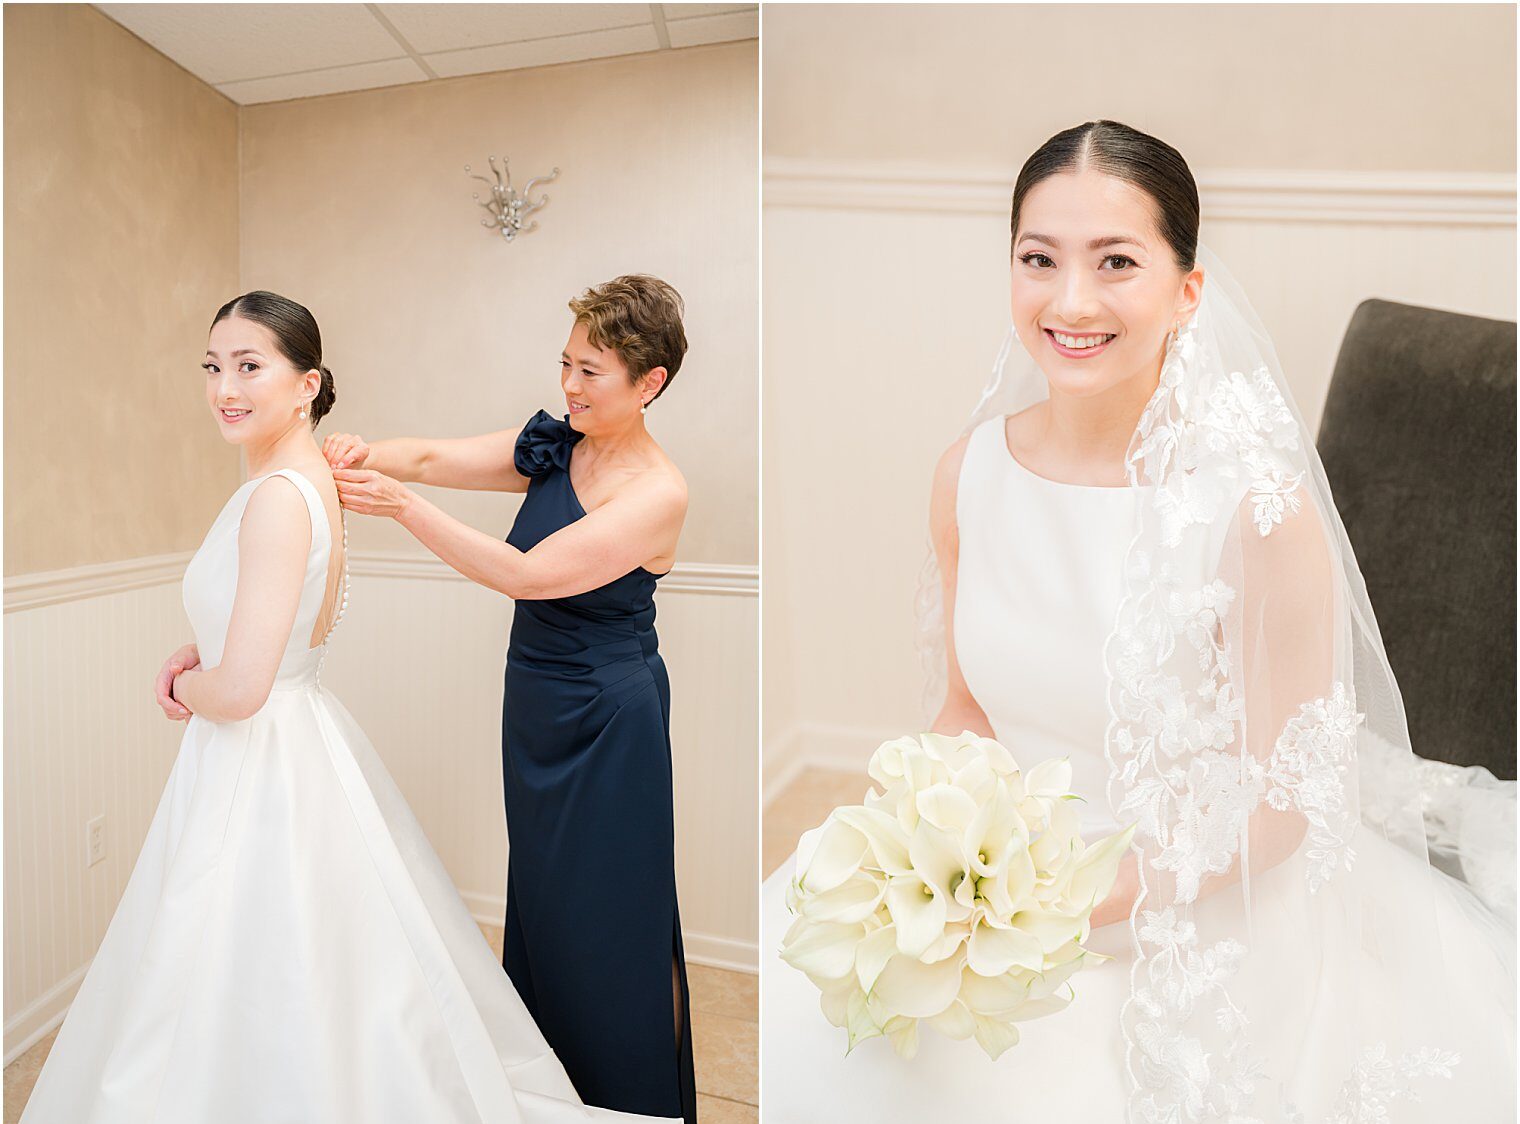 Mom of the bride, helping her daughter to get ready for the big day at Windows on the Water